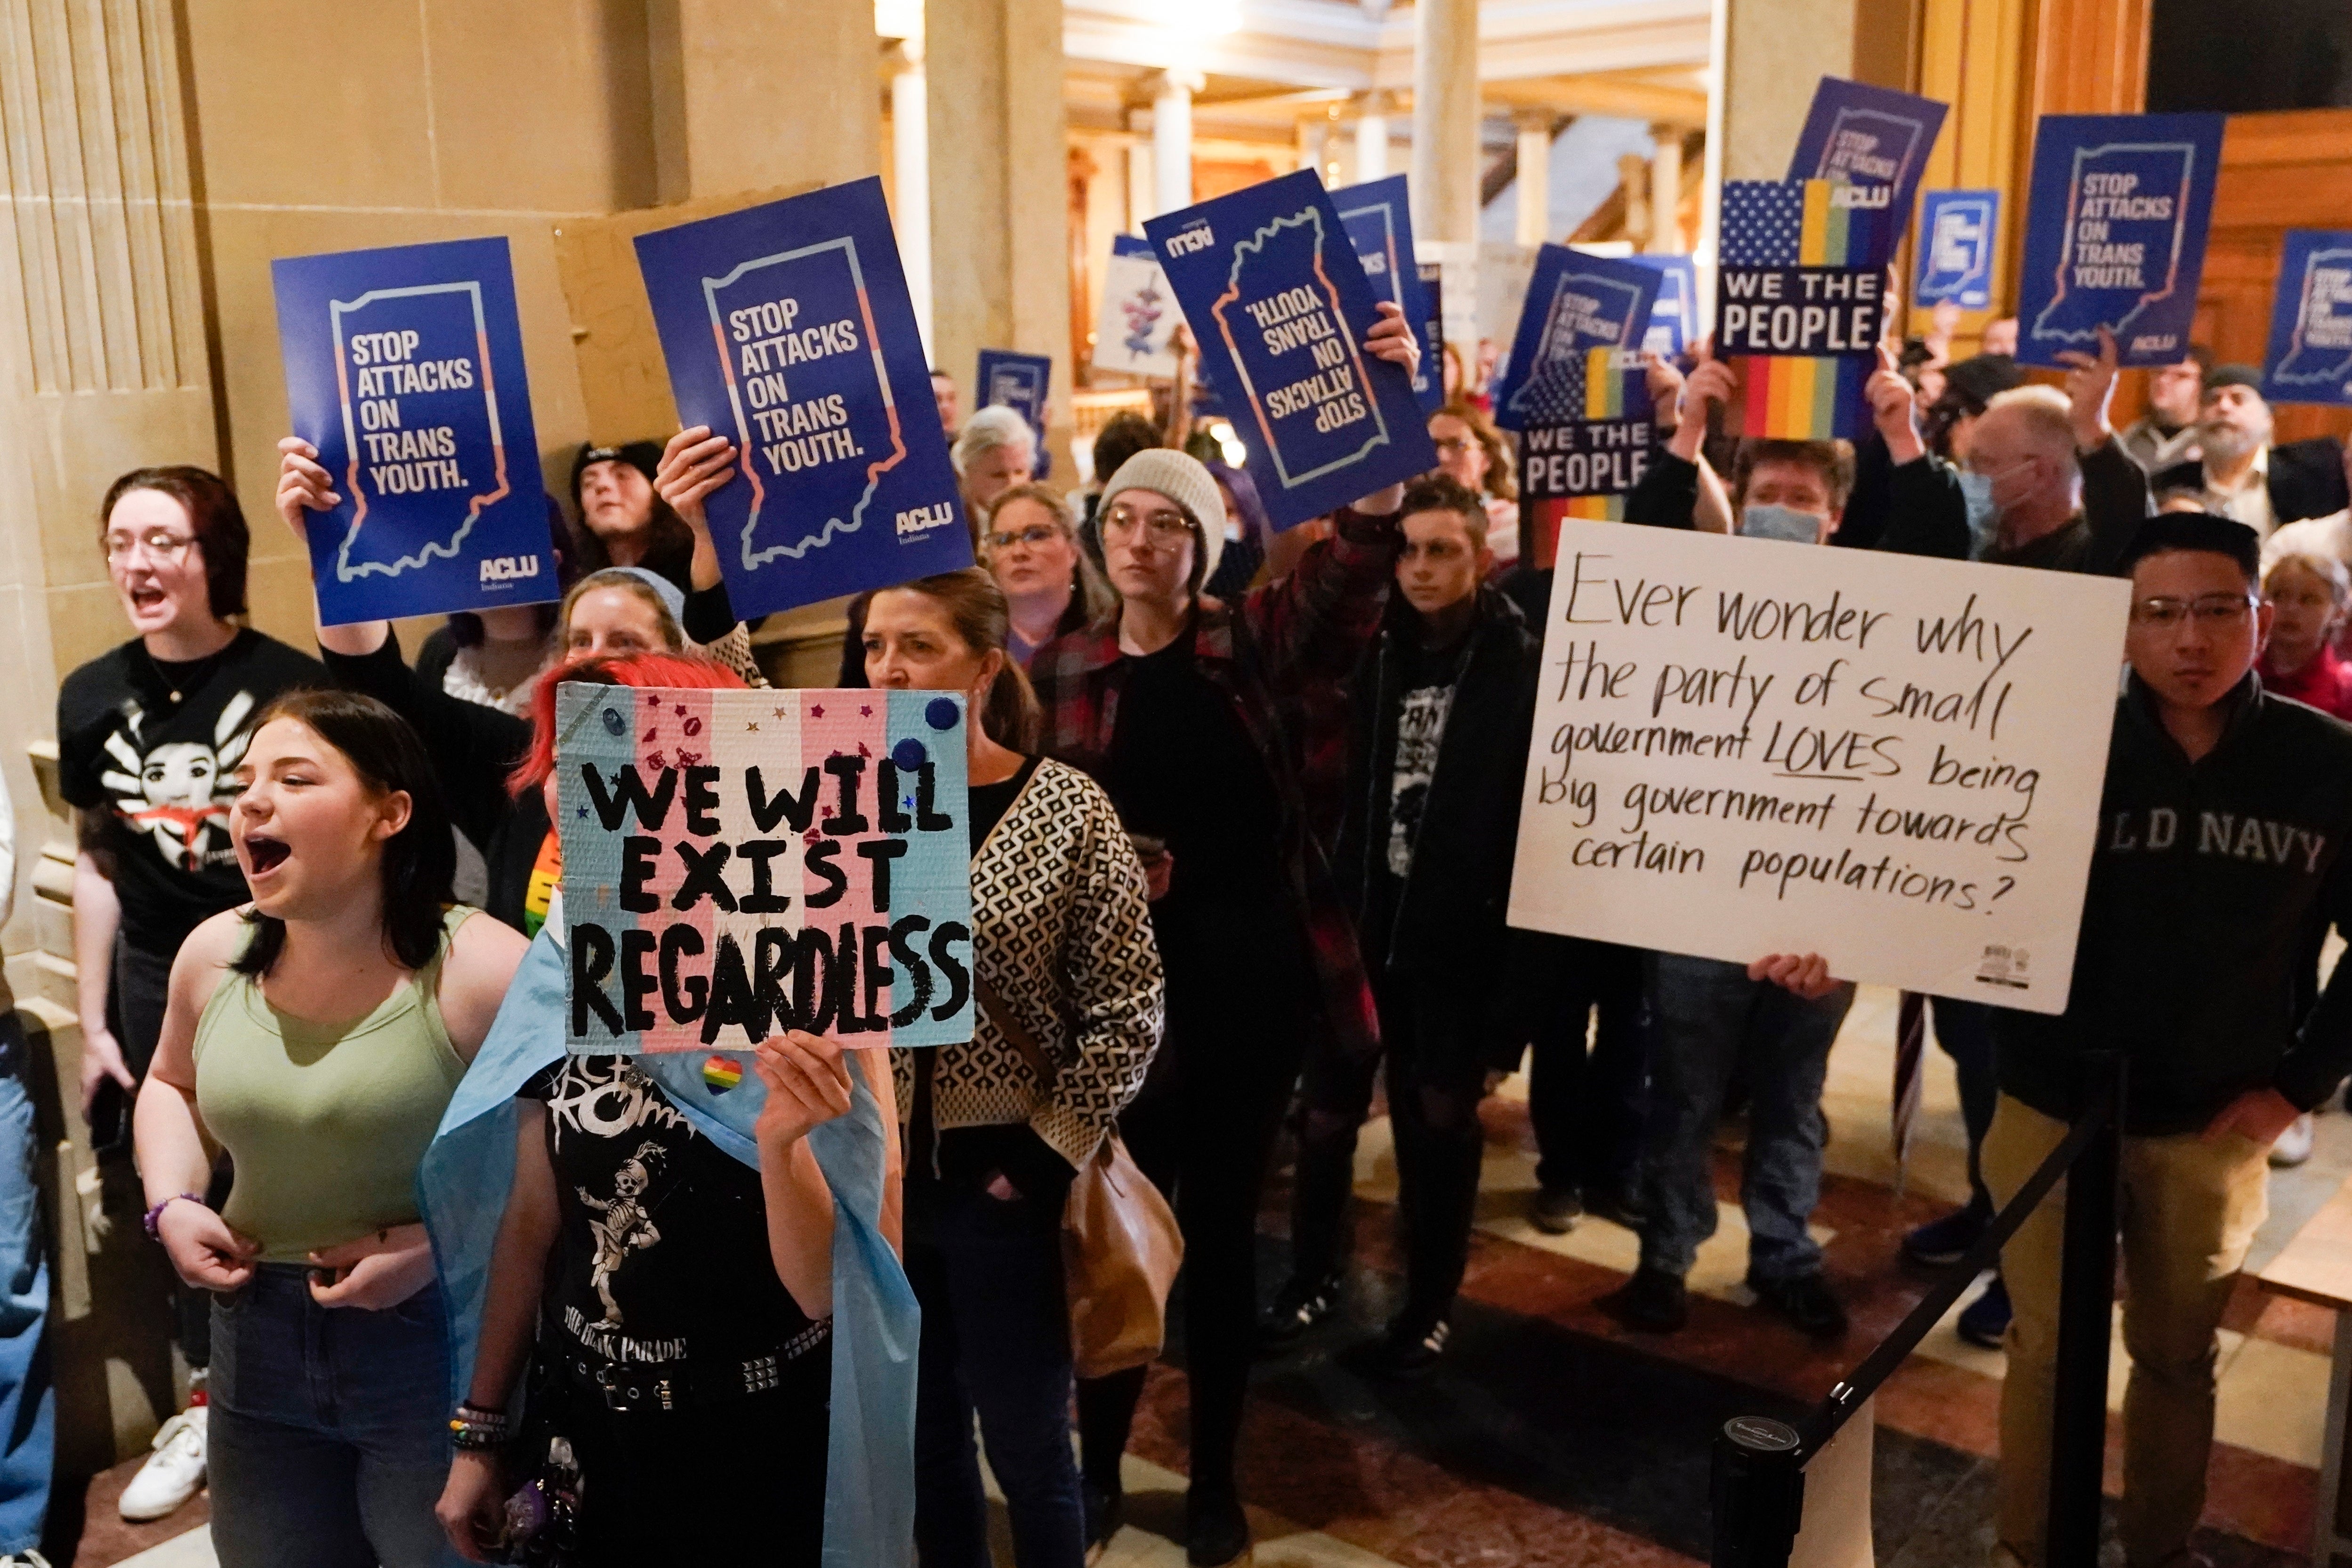 Protesters stand outside of the Senate chamber at the Indiana Statehouse on Feb. 22, 2023, in Indianapolis. The Human Rights Campaign declared a state of emergency for LGBTQ+ people in the U.S. on Tuesday, June 6 and a released a guidebook summarizing what it calls discriminatory laws in each state, along with “know your rights” information and health and safety resources. (AP Photo/Darron Cummings, File)